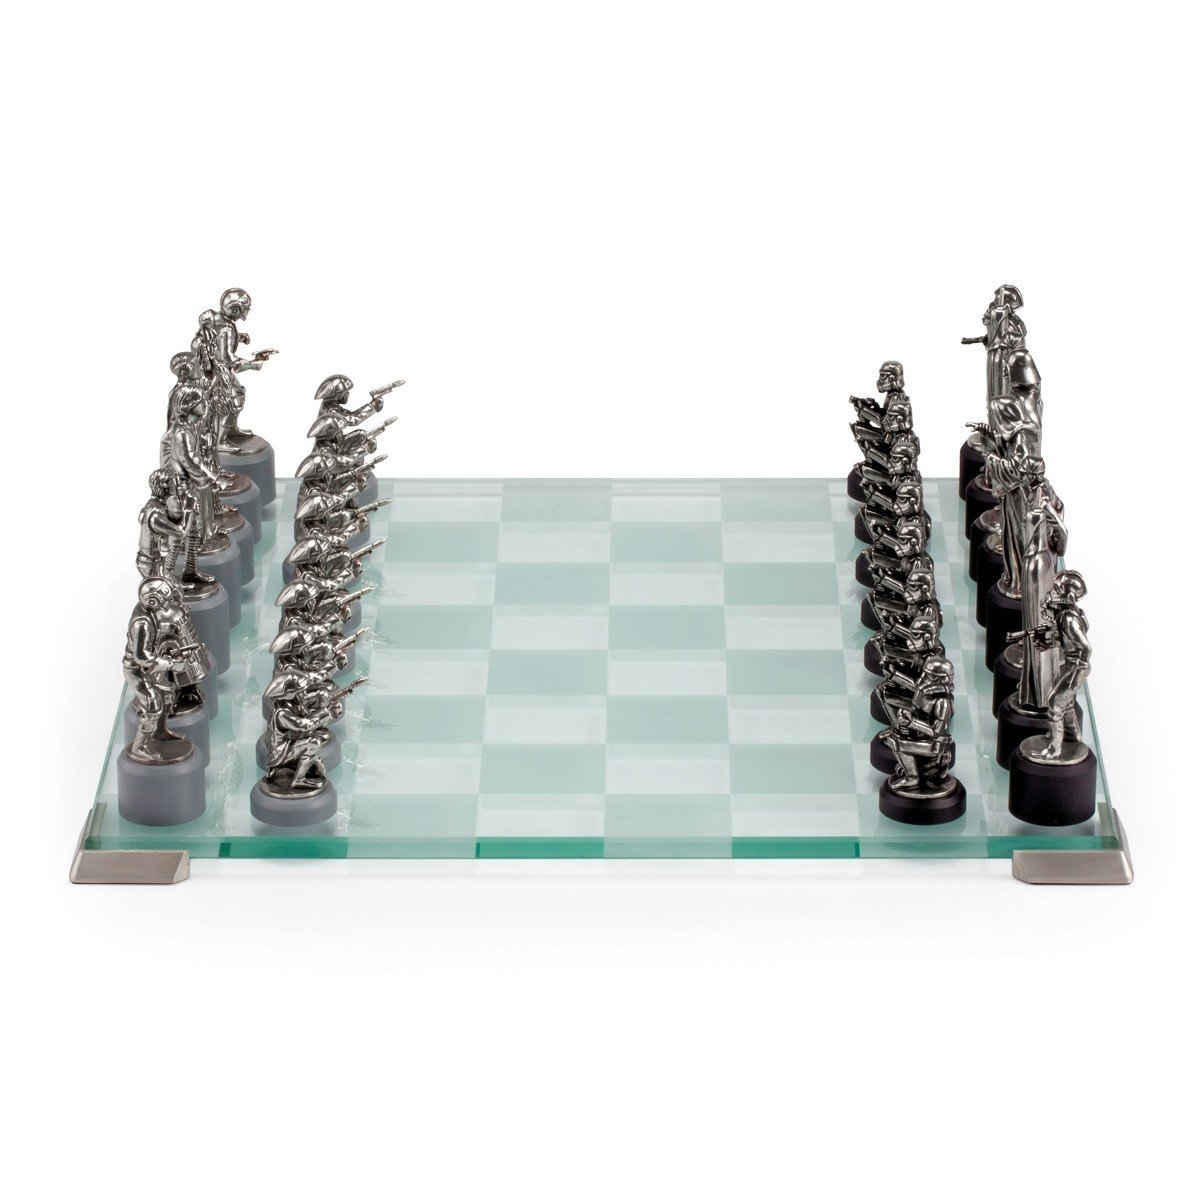 Star Wars Star Wars Classic Chess Set - Collectible Gift